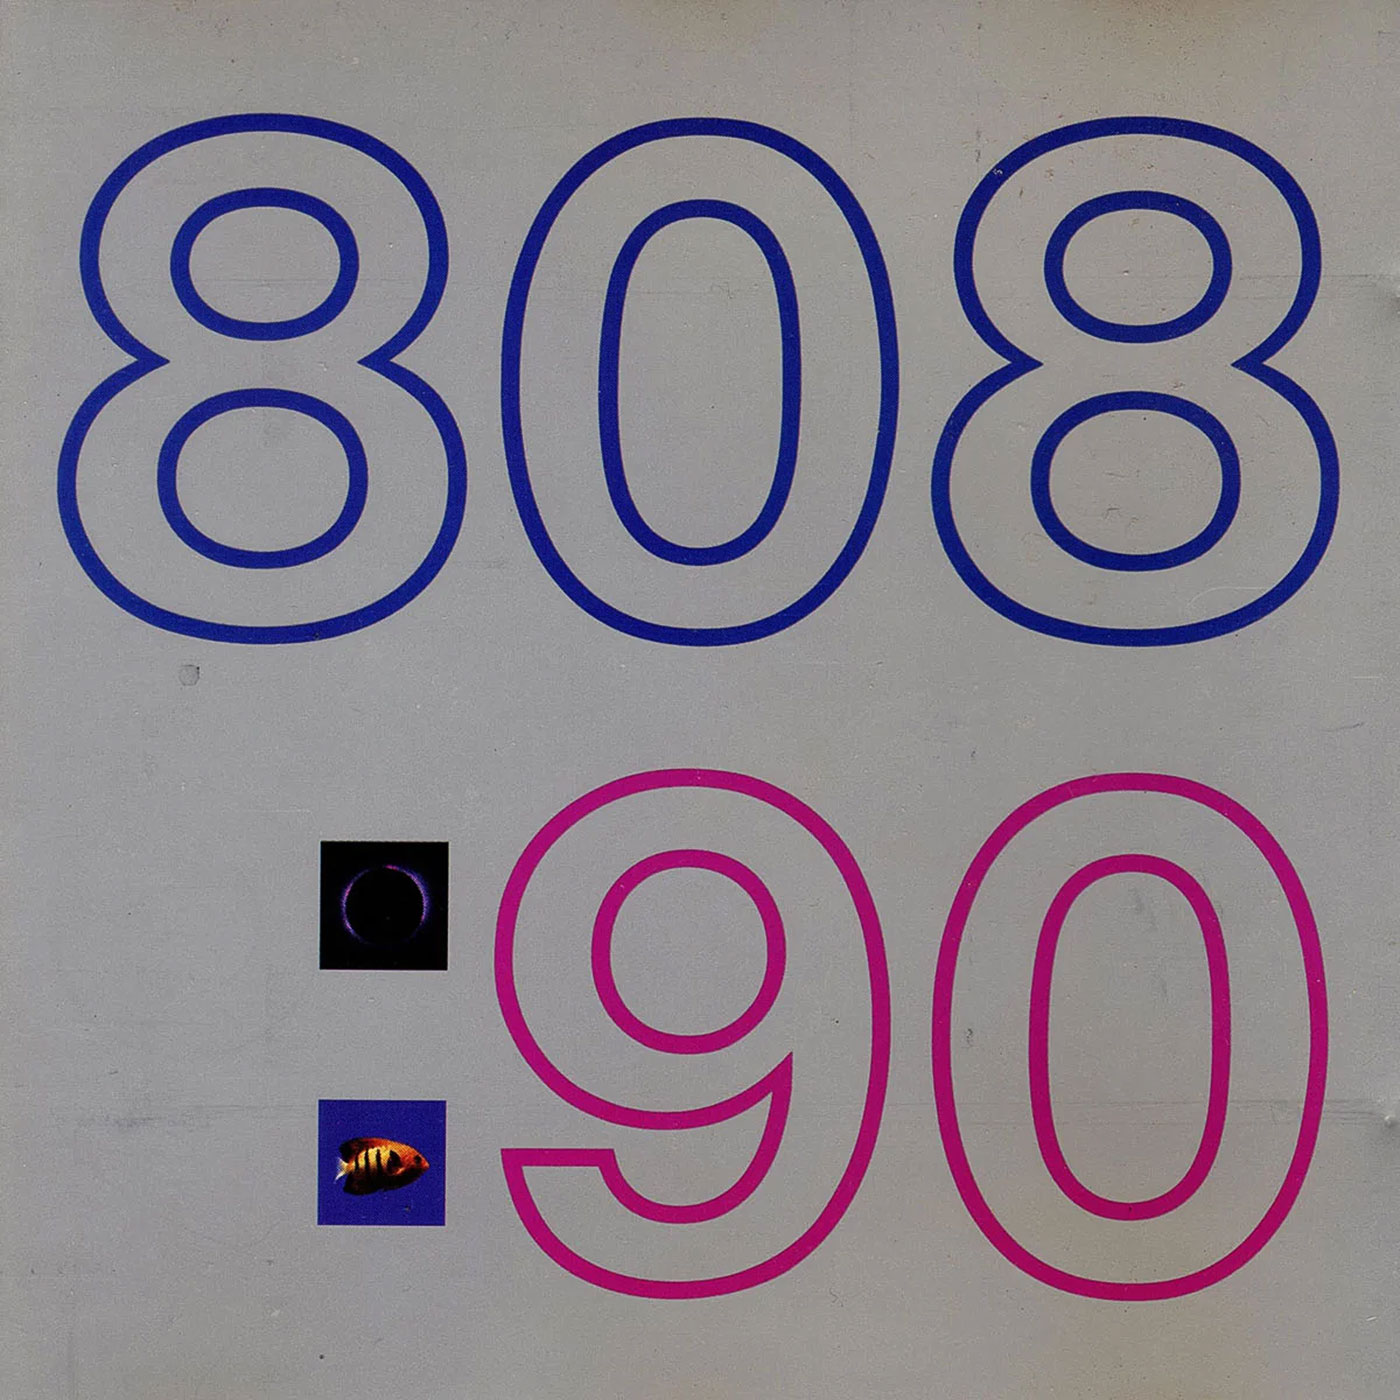 652 808 State – 90